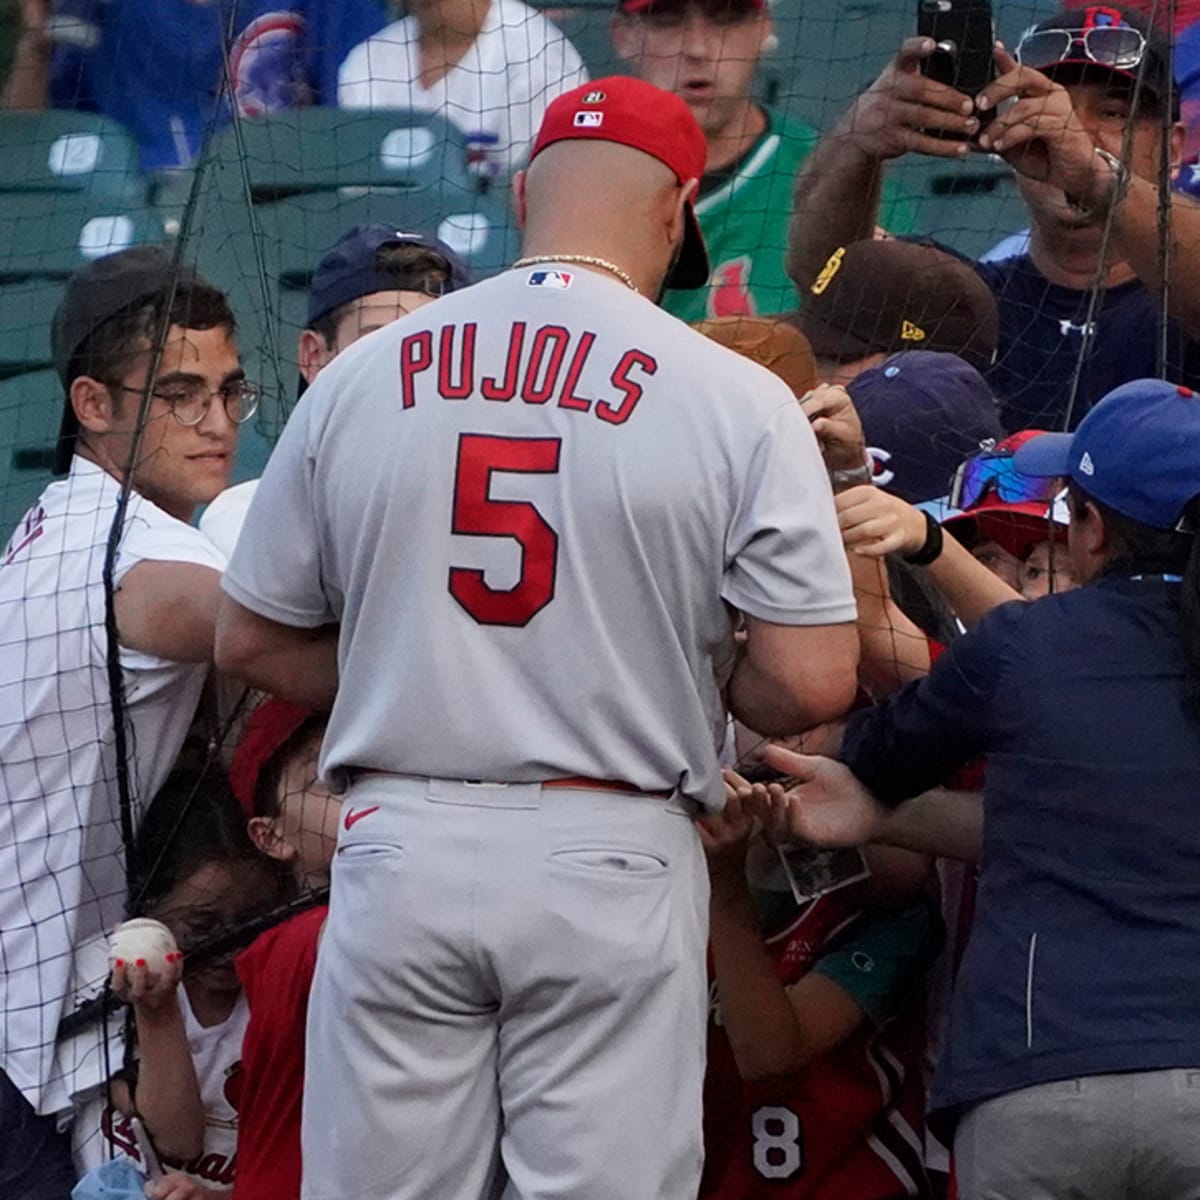 Dodgers: Albert Pujols' jersey number revealed and we should've guessed